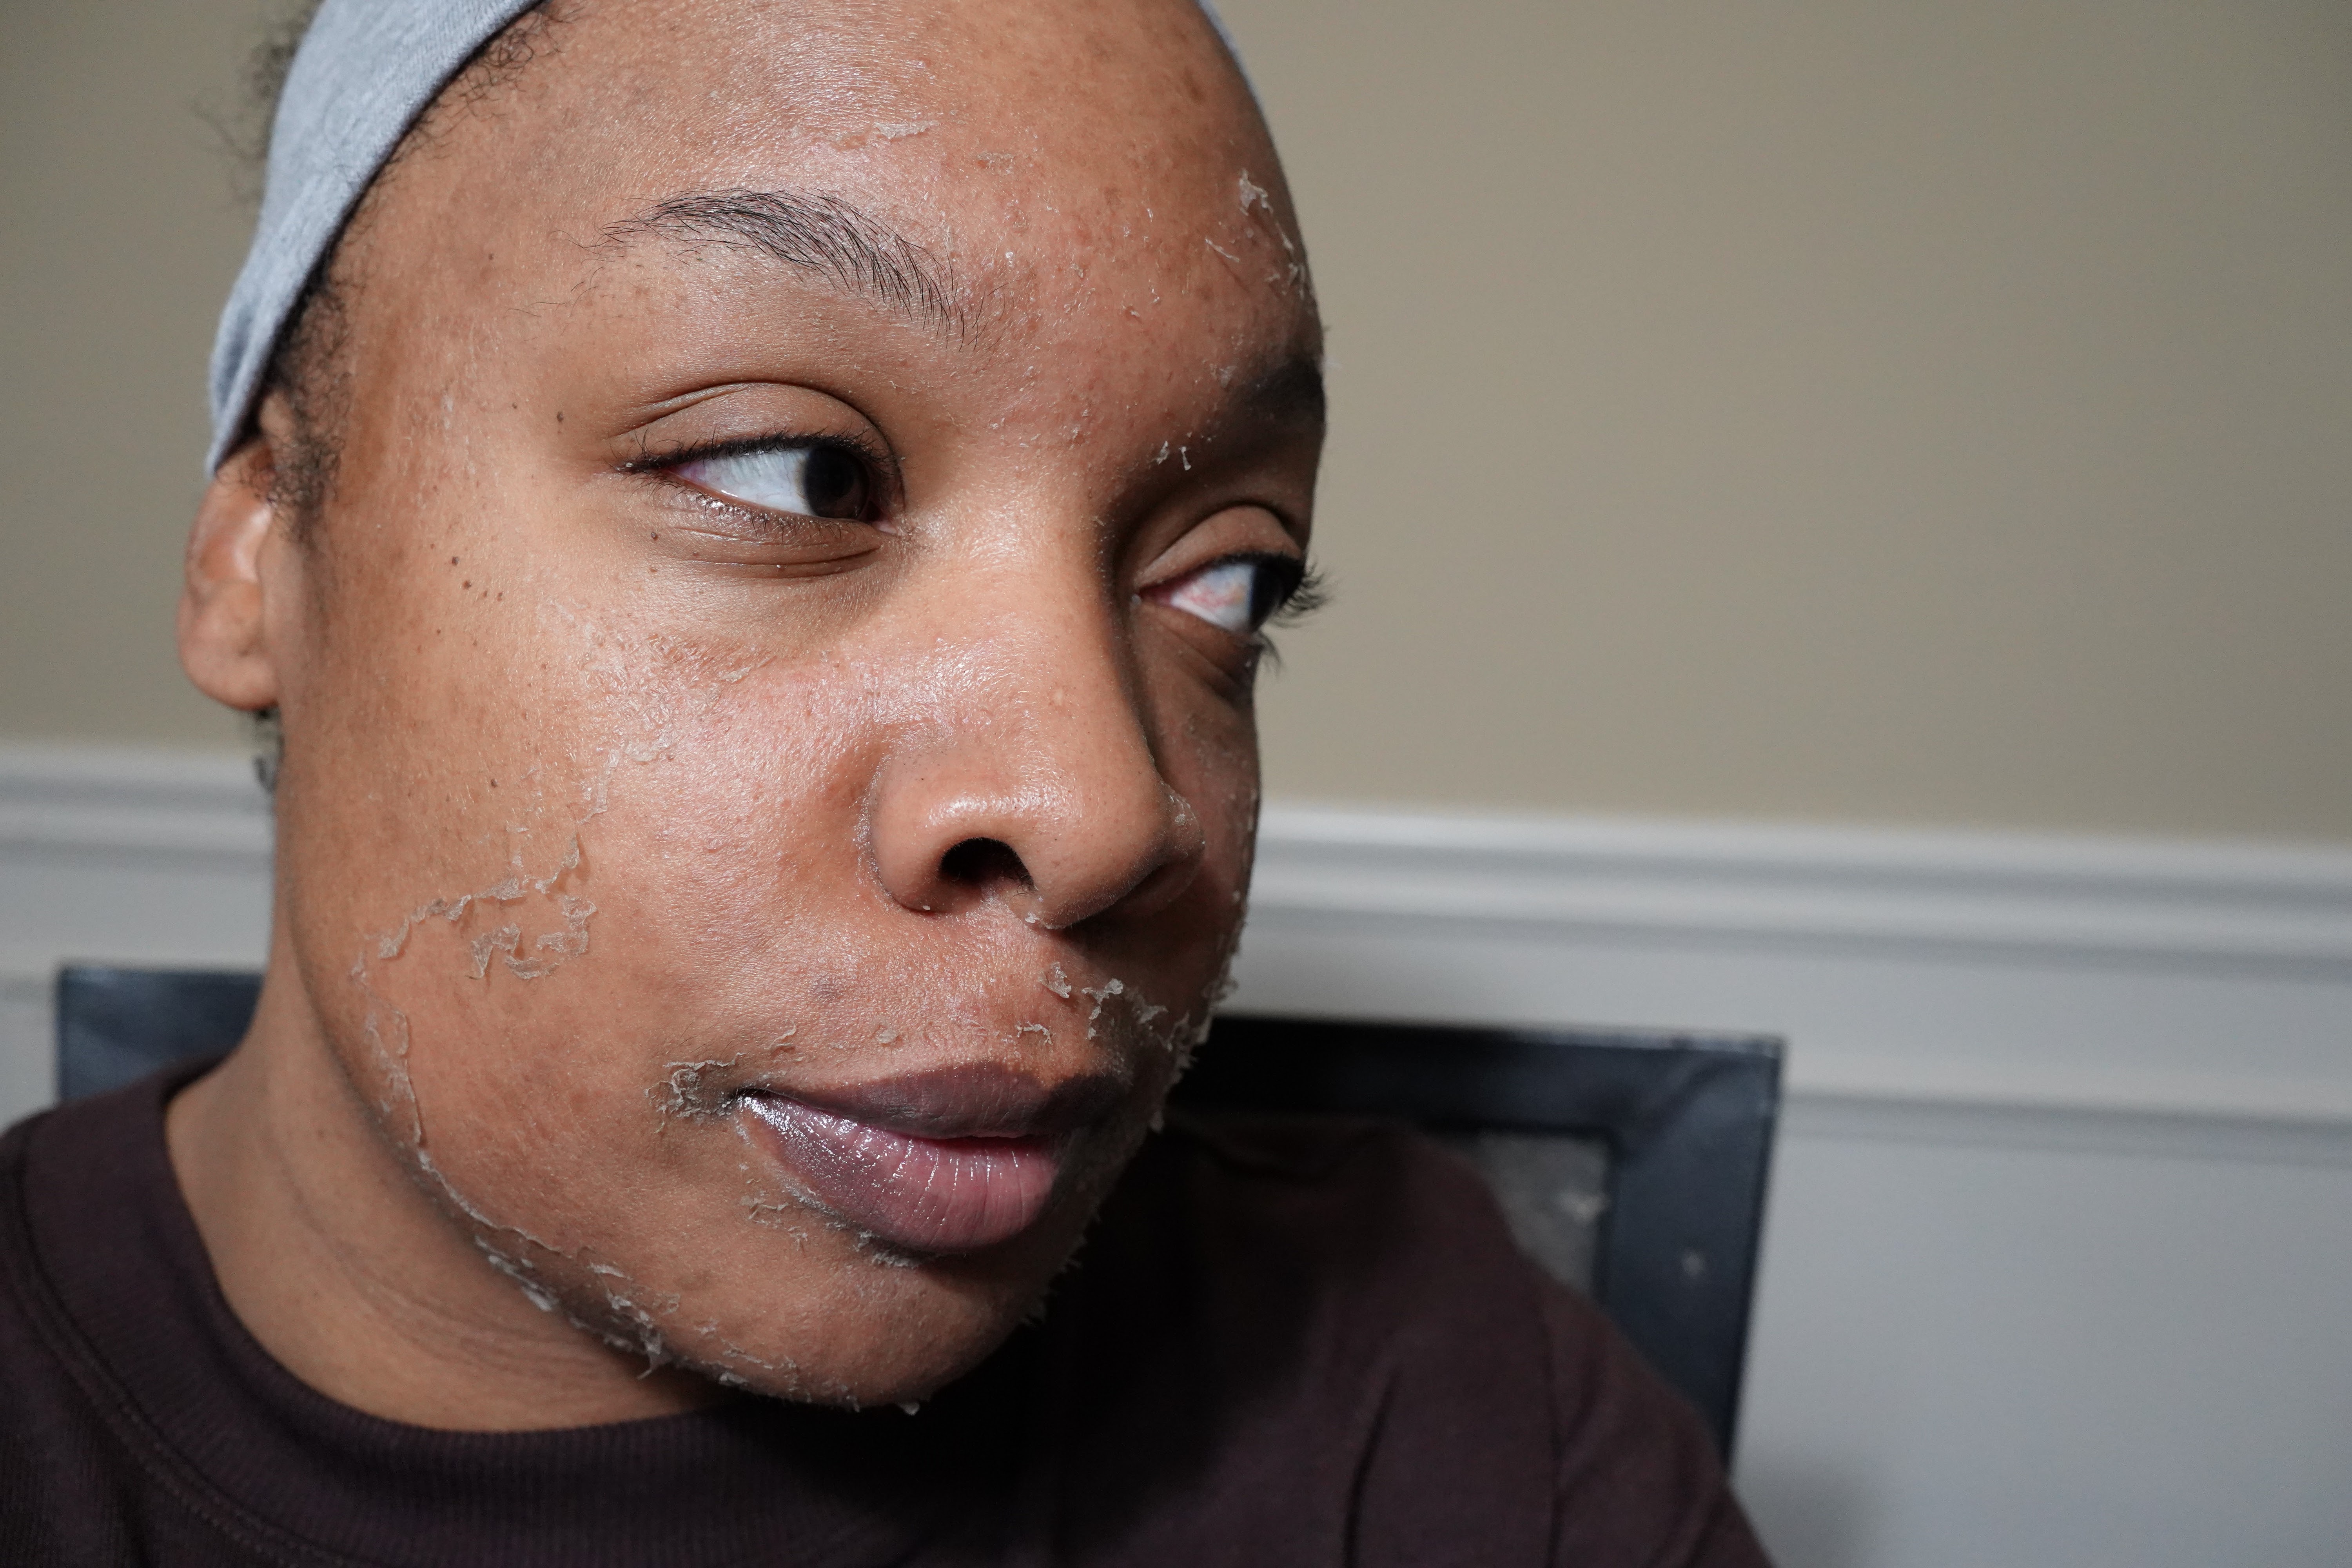 Video: Are Chemical Peels Worth it?  My First Experience